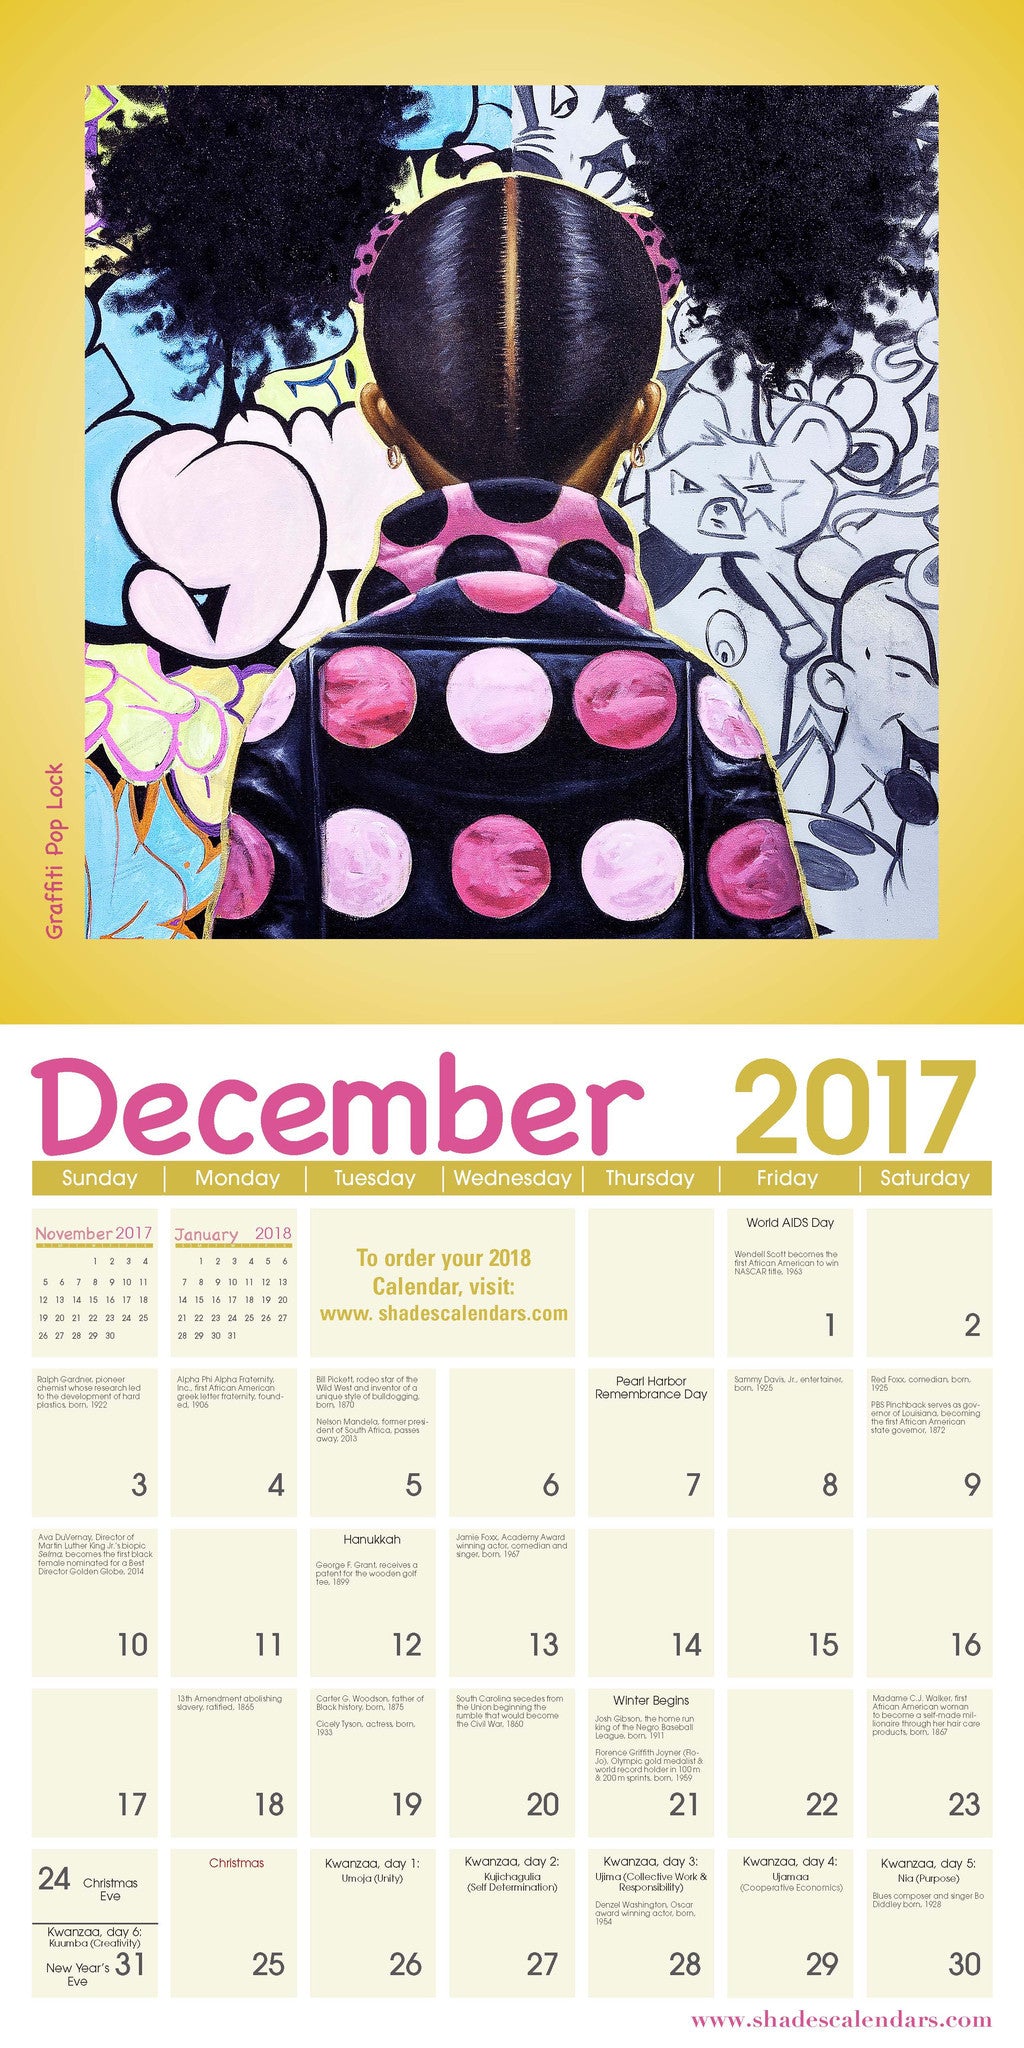 Shades of Color Kids by Frank Morrison (2017 African American Calendar)